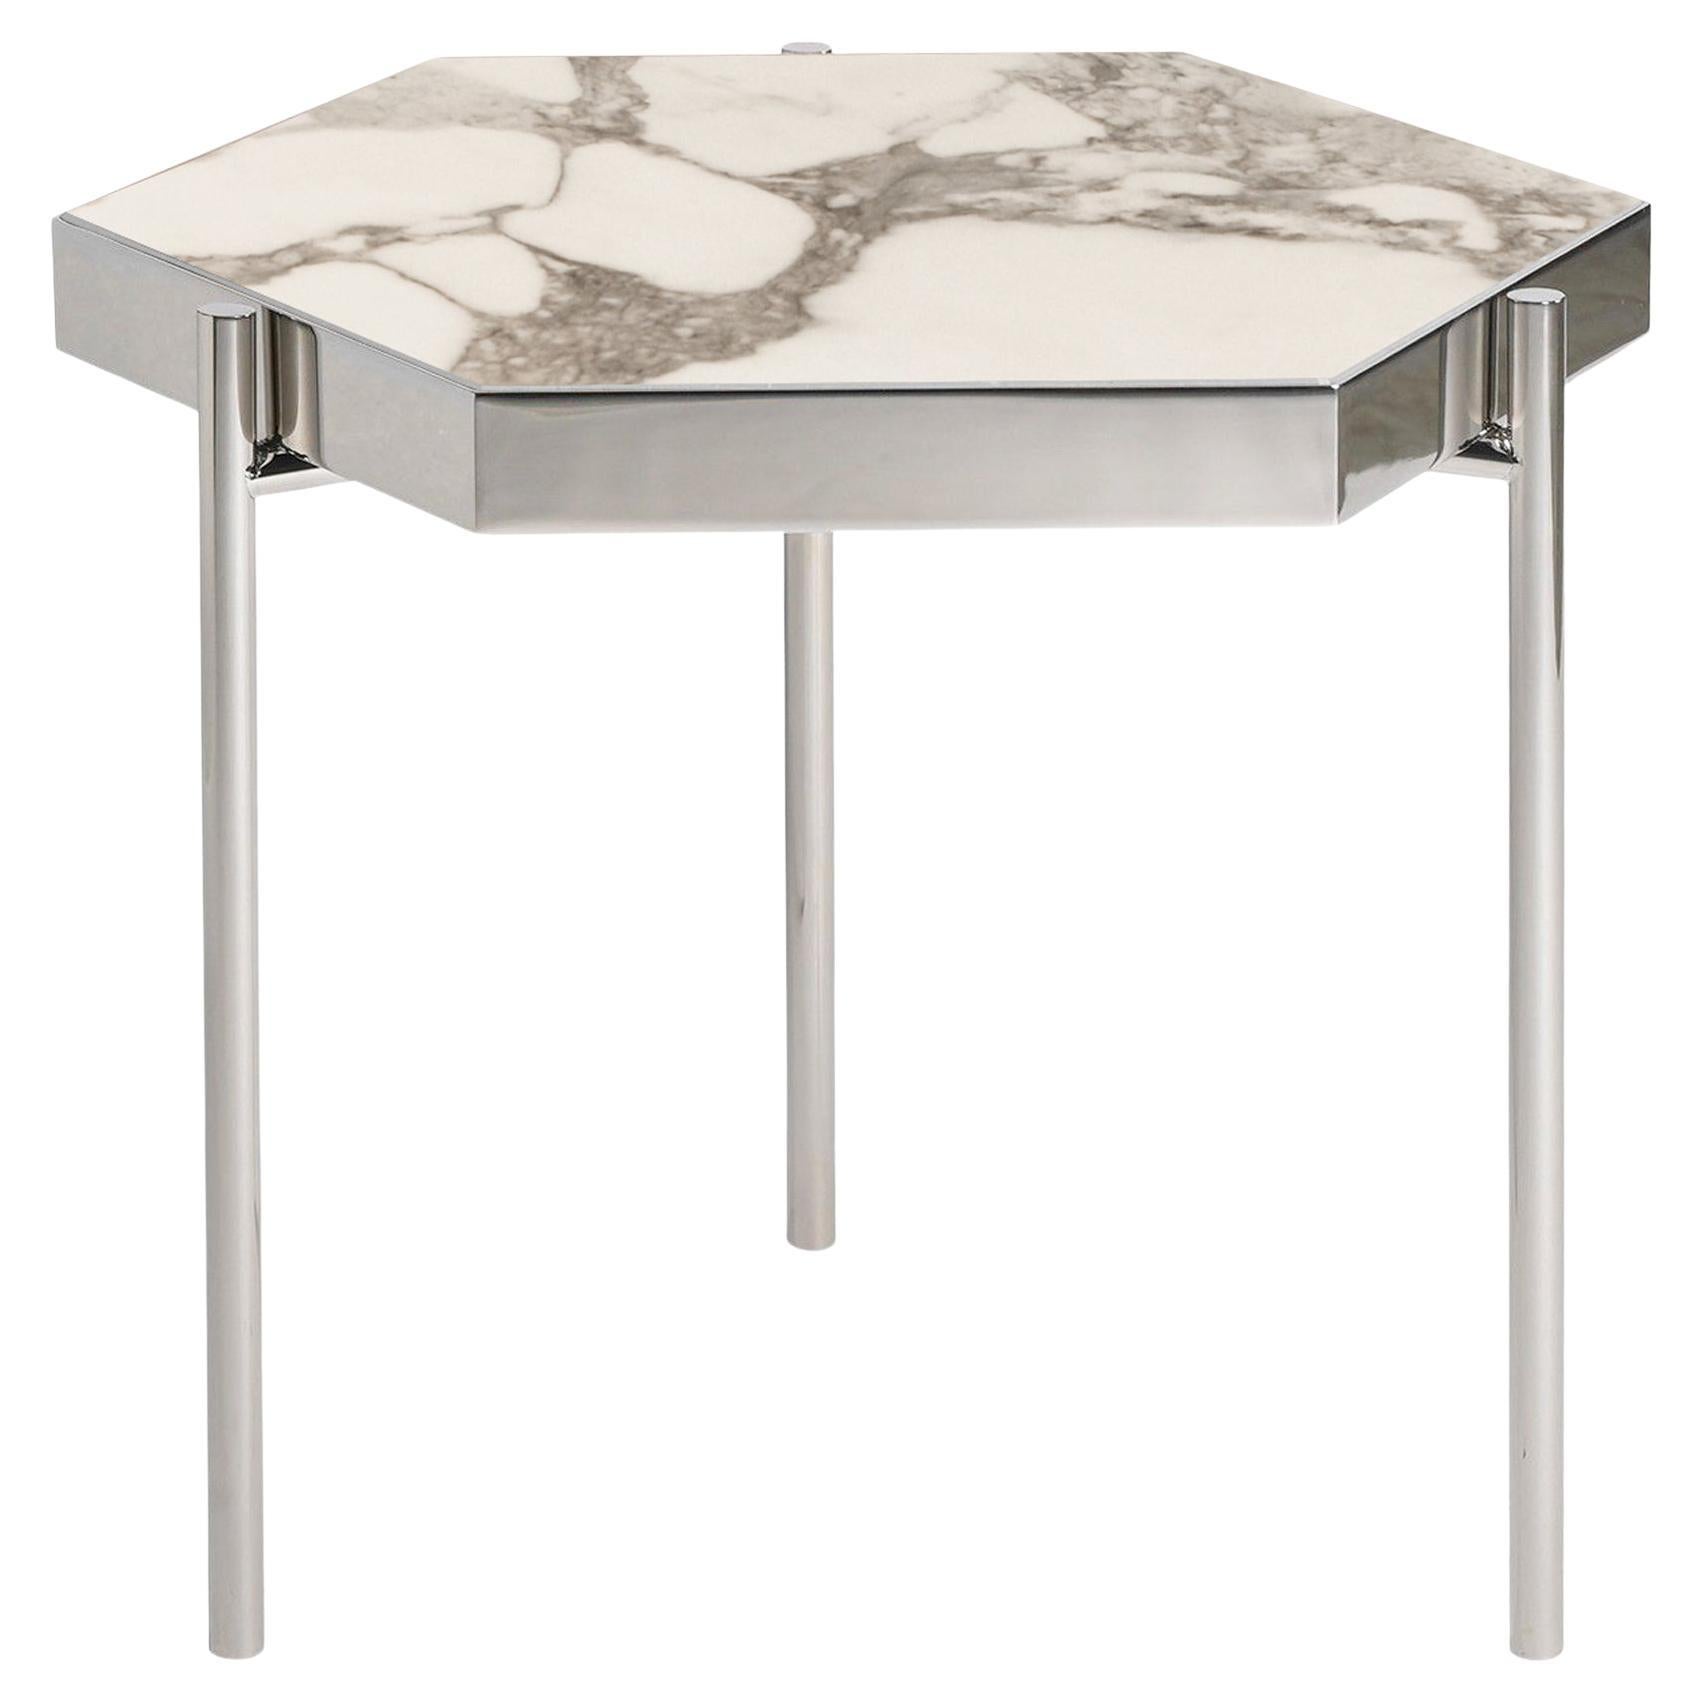 Pair of White Marble Staineless Steel Side Hexagonal Tables